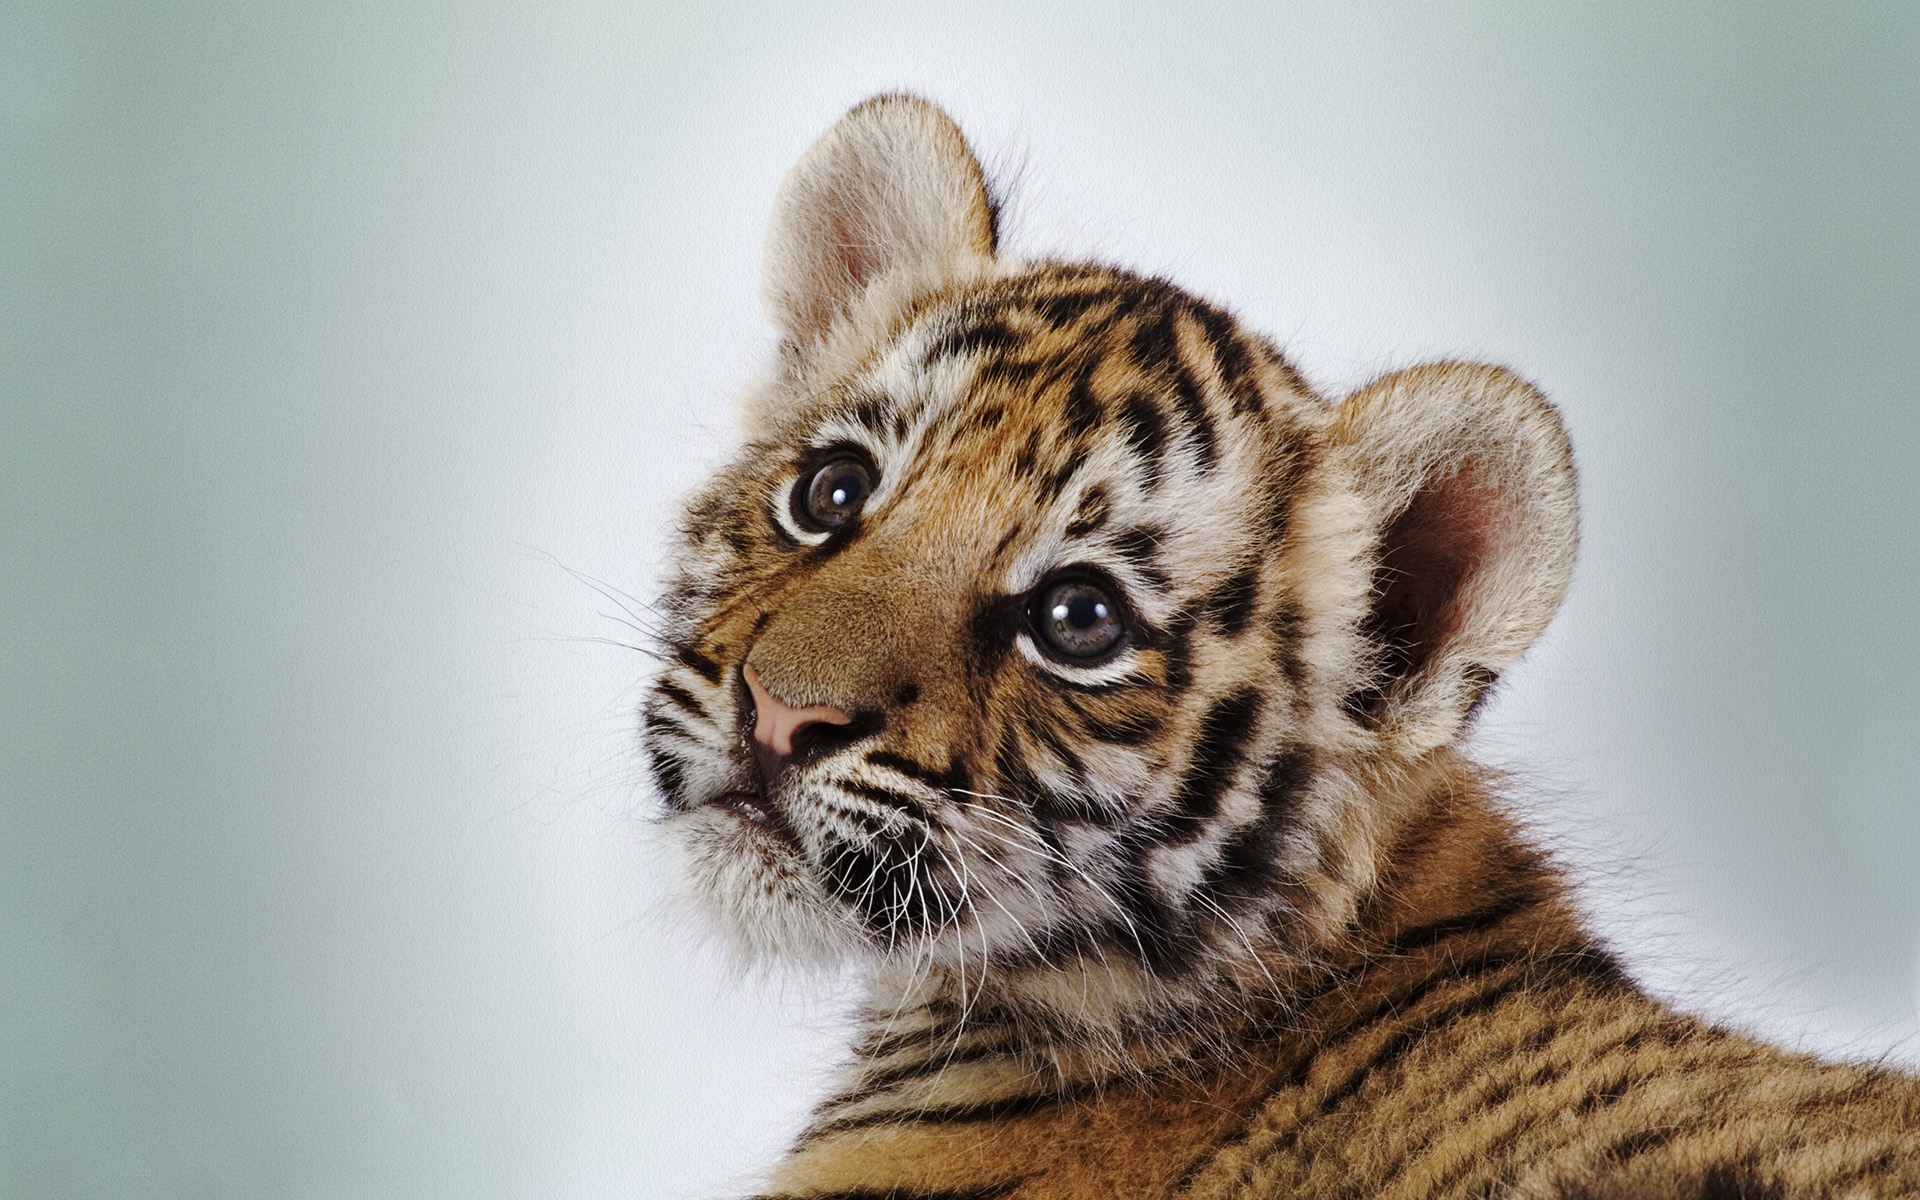 Wallpaper Of Animals A Cute Tiger Cub Looking At Something